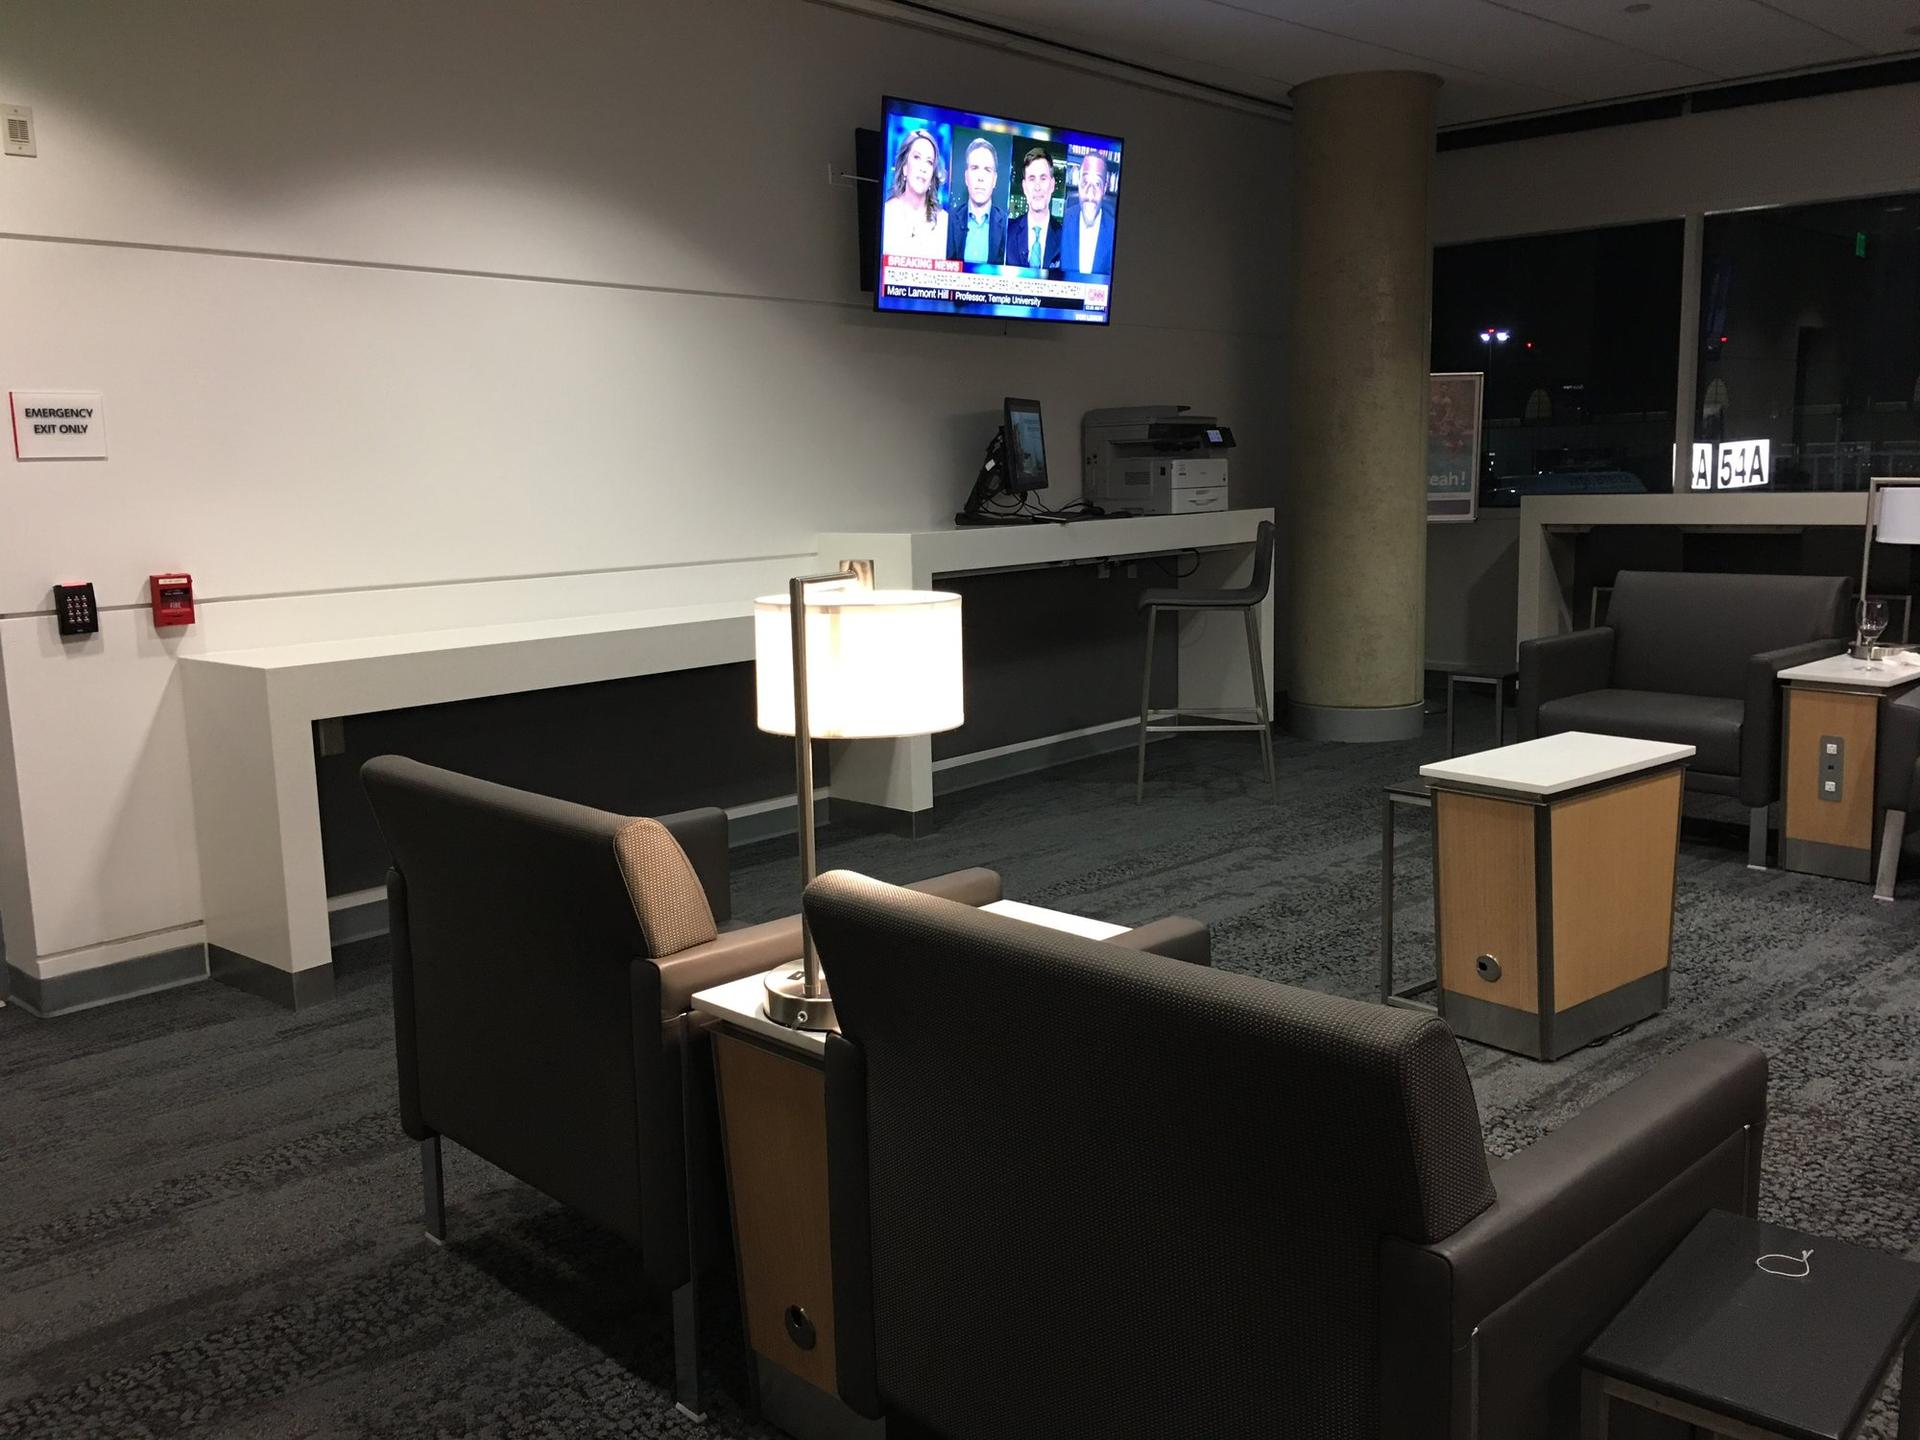 American Airlines Admirals Club image 11 of 38